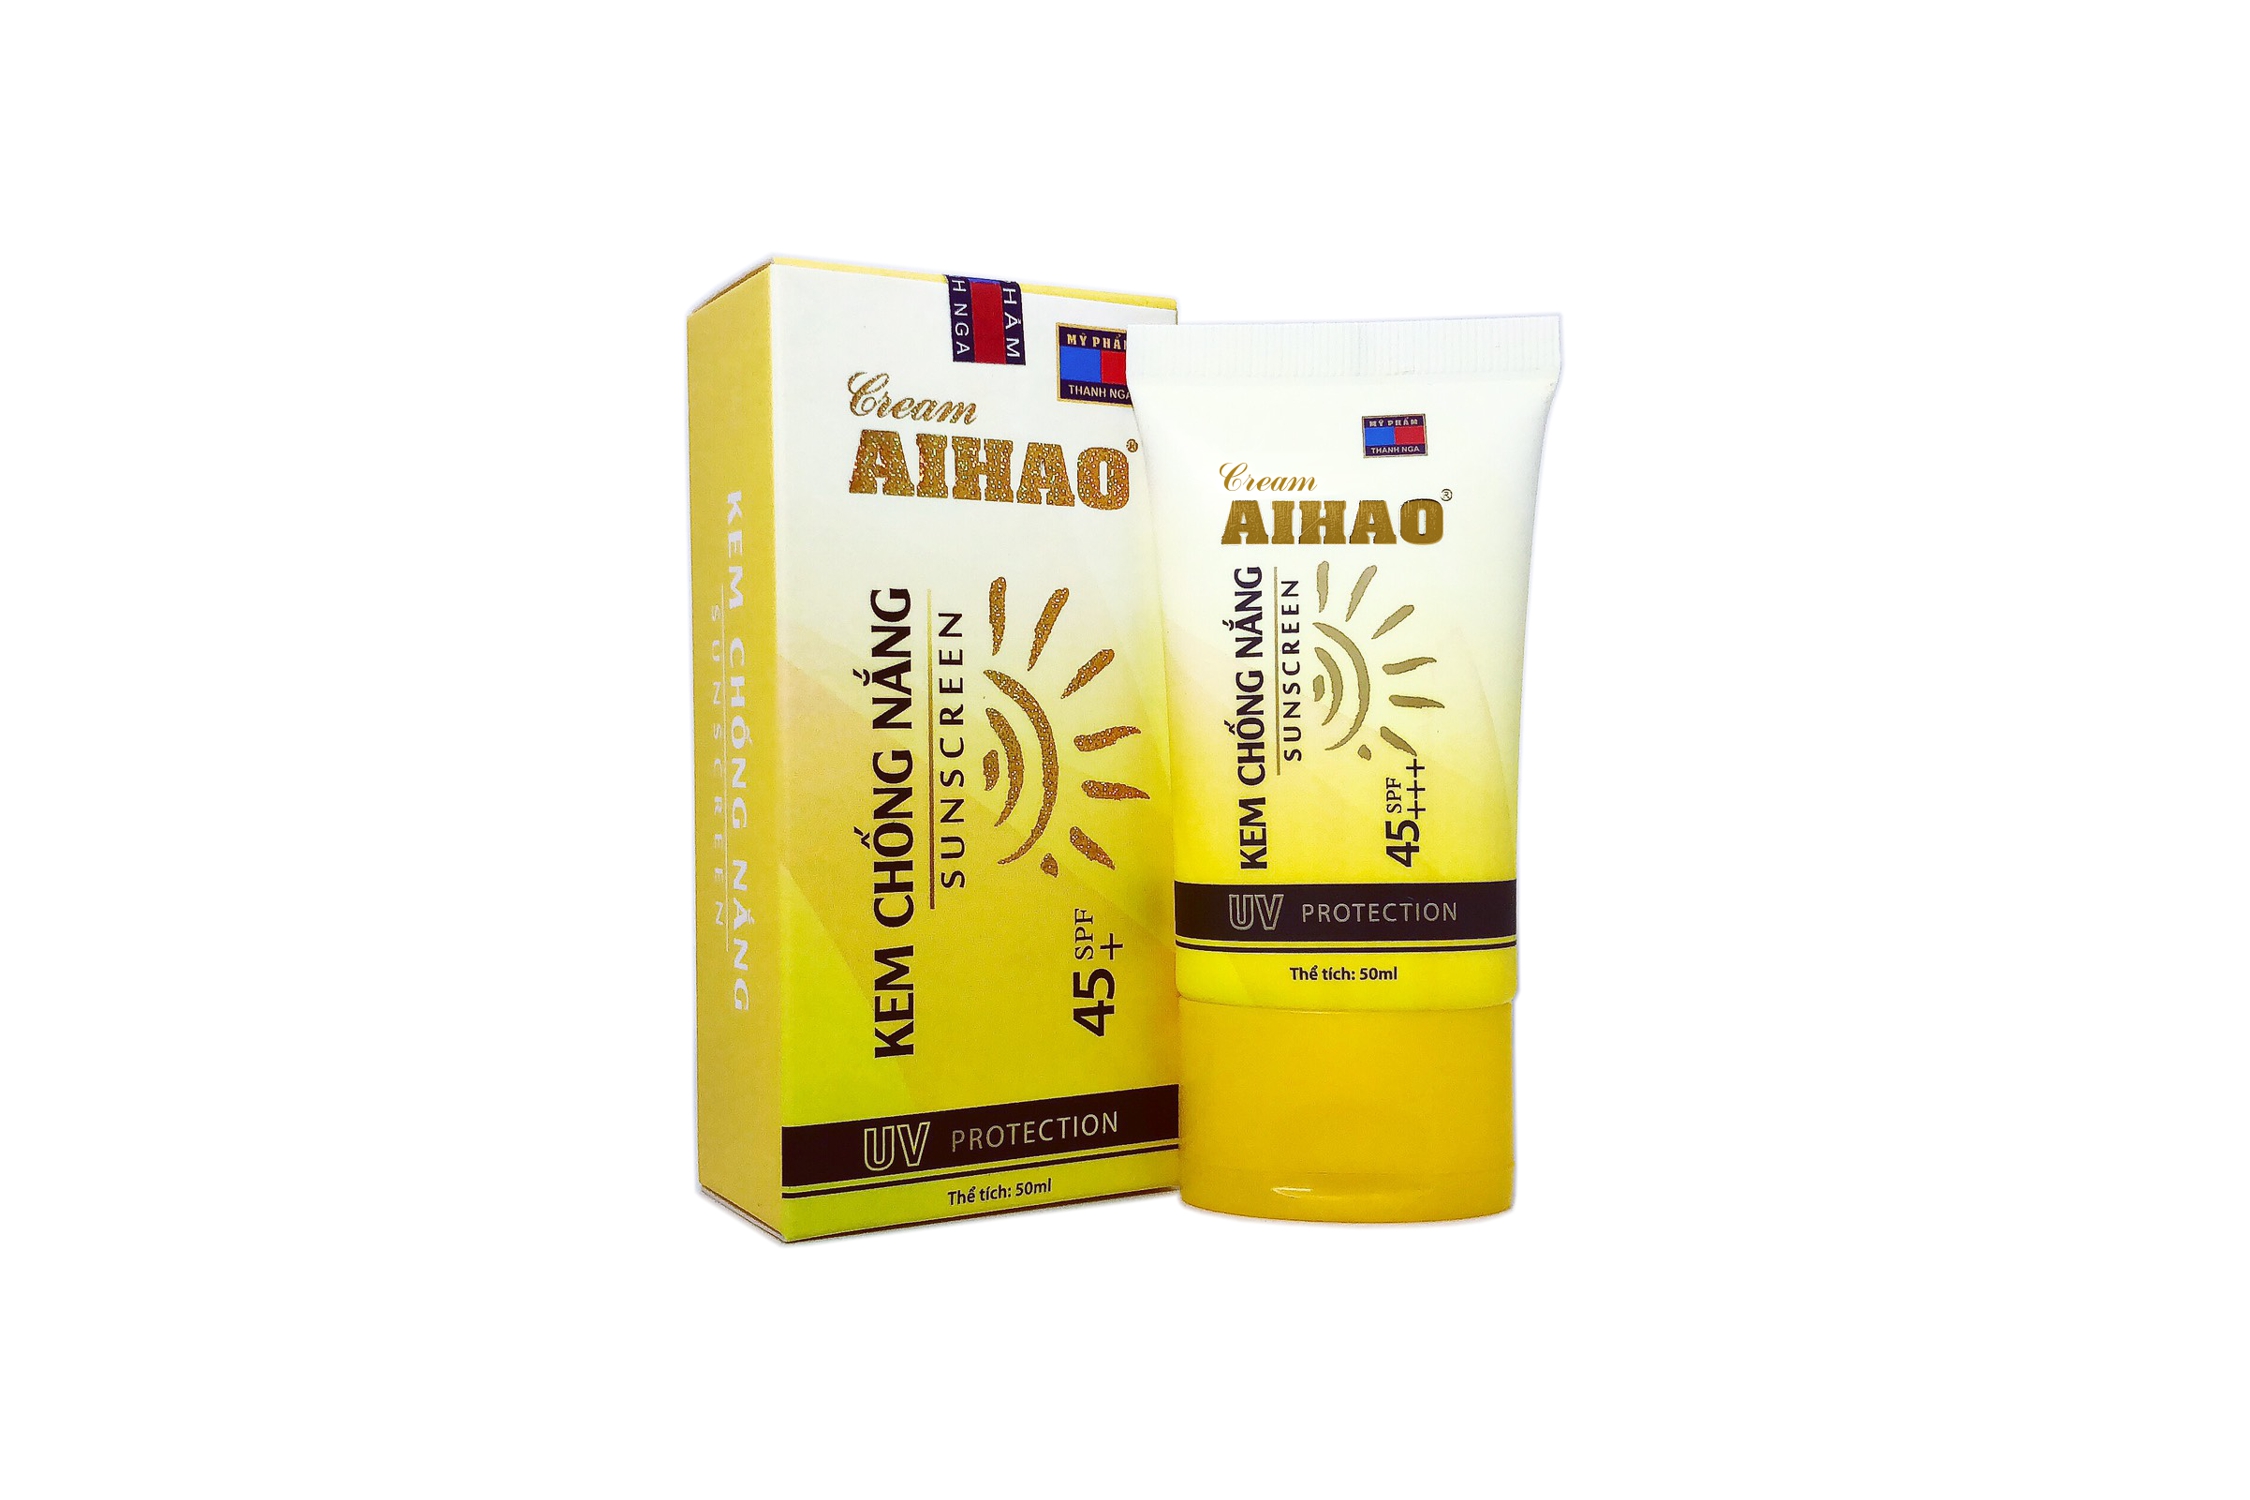 AIHAO Kem Chống Nắng (50ml)